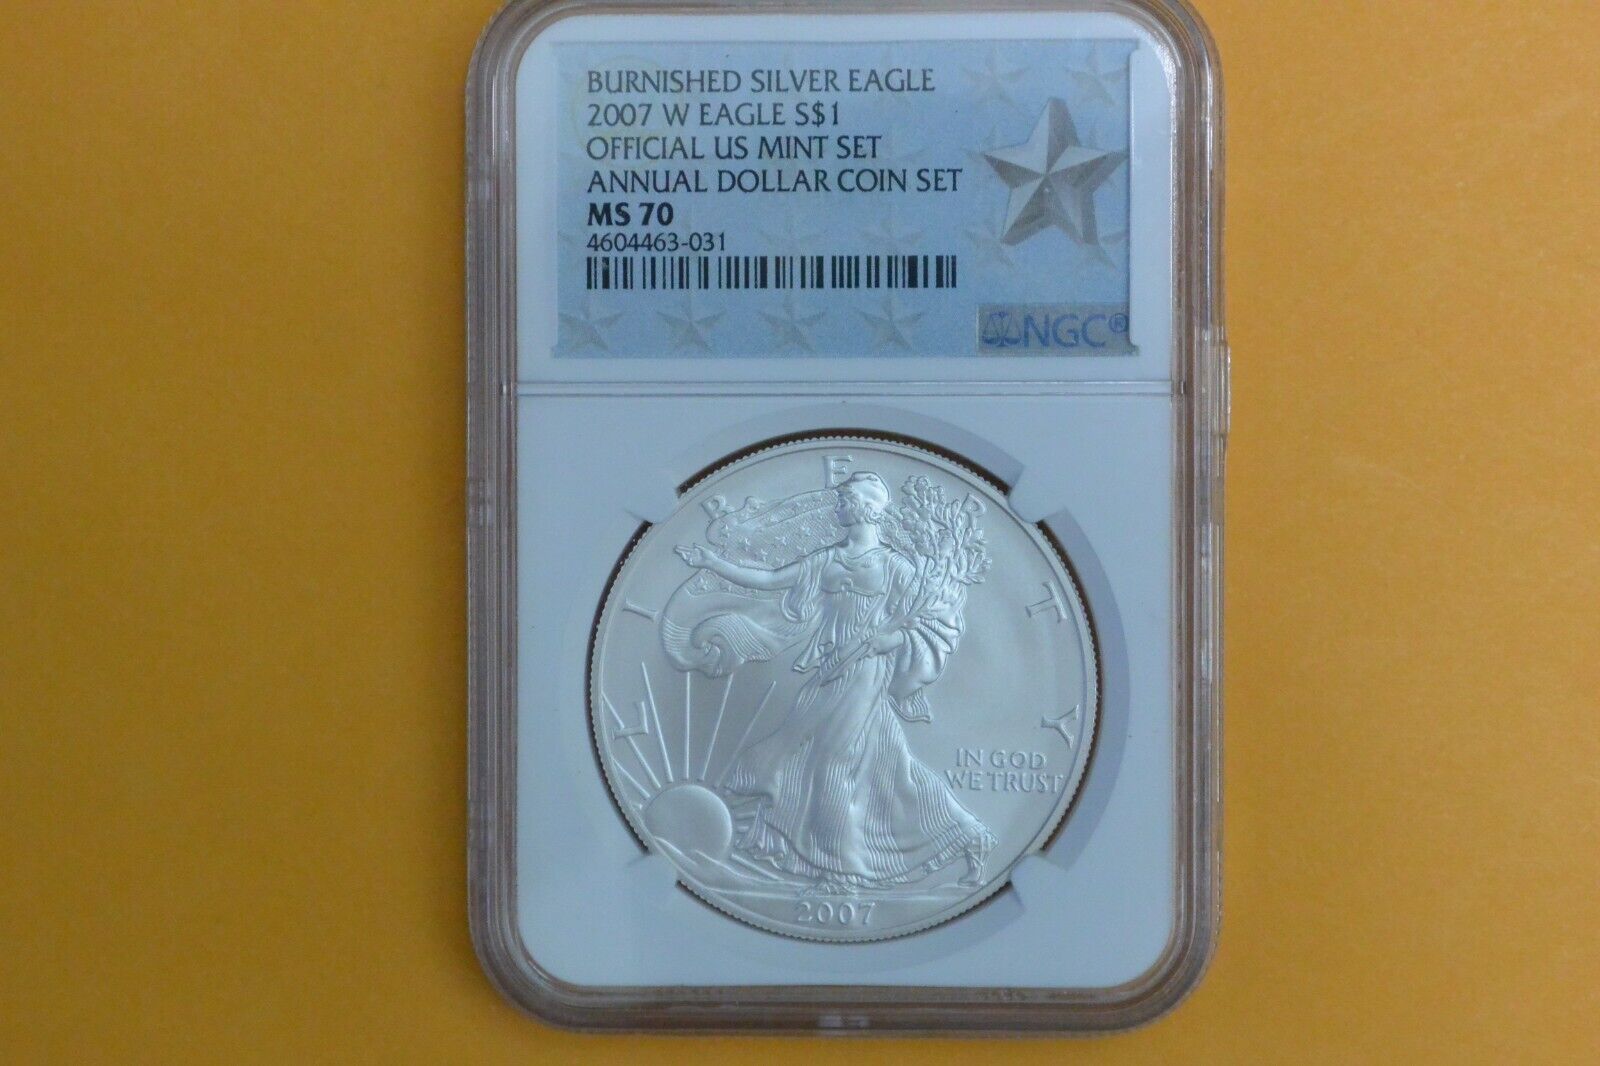 2007 W BURNISHED SILVER EAGLE NGC MS70 ANNUAL DOLLAR  UNC SET LABEL